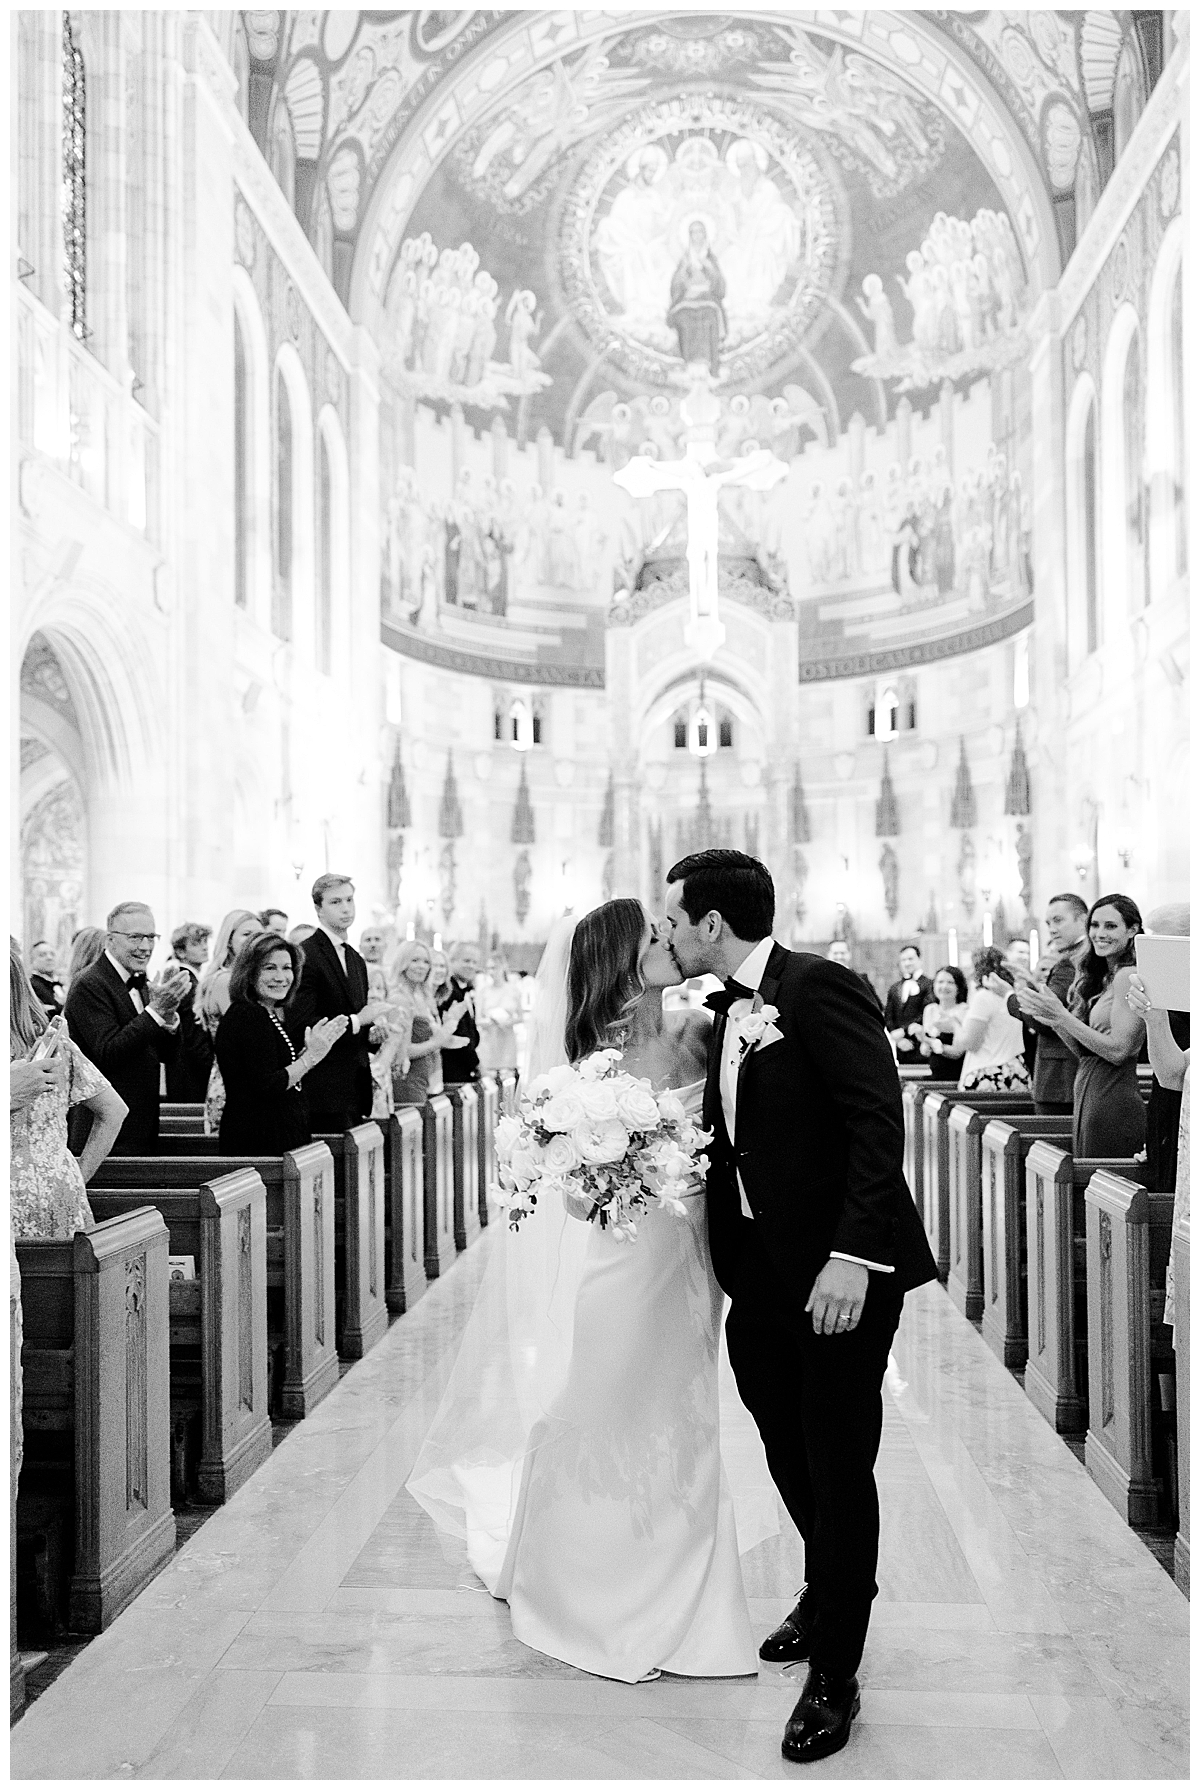 They are married! Bride and Groom Rosary Cathedral Wedding 